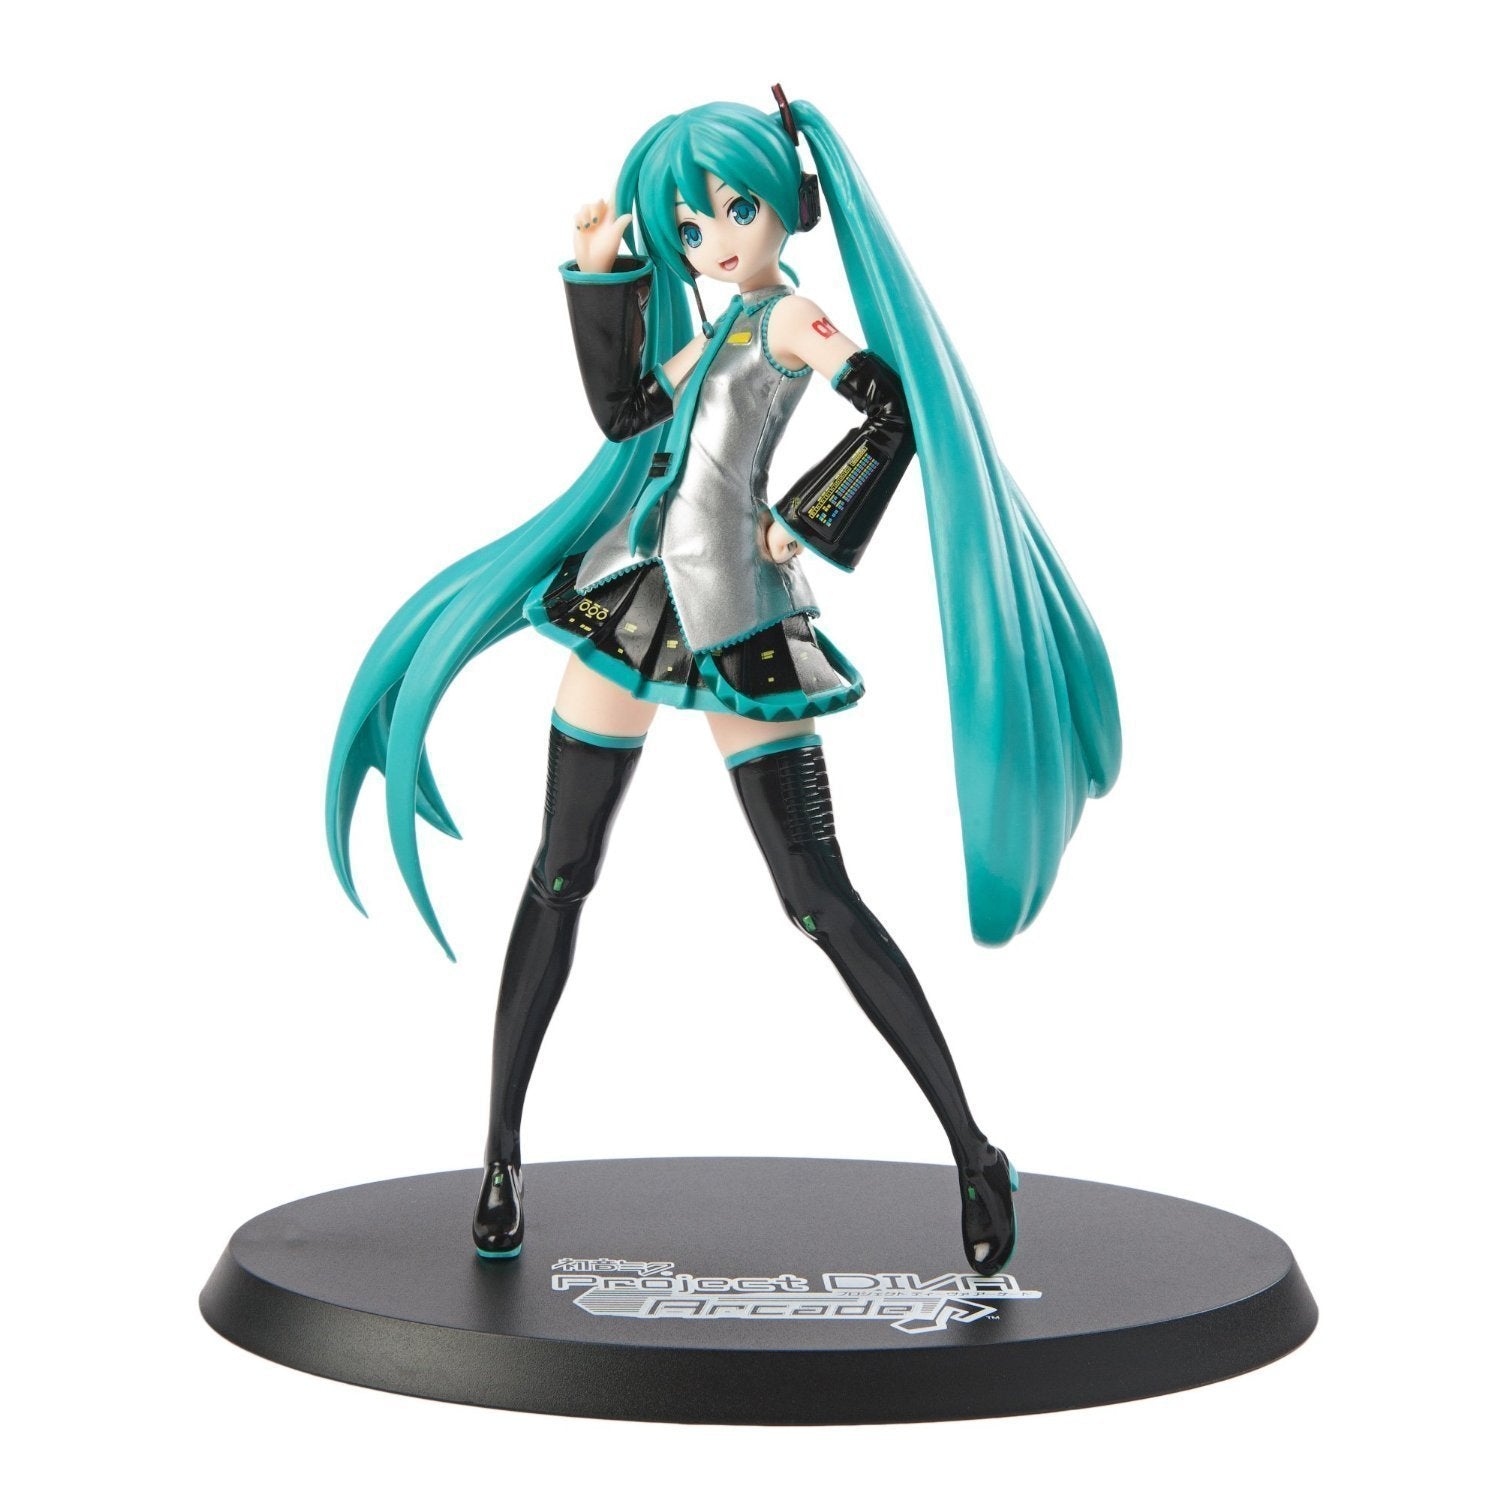 Buy Good Smile Hatsune Miku Figma 20 Action Figure Online at Low Prices  in India  Amazonin